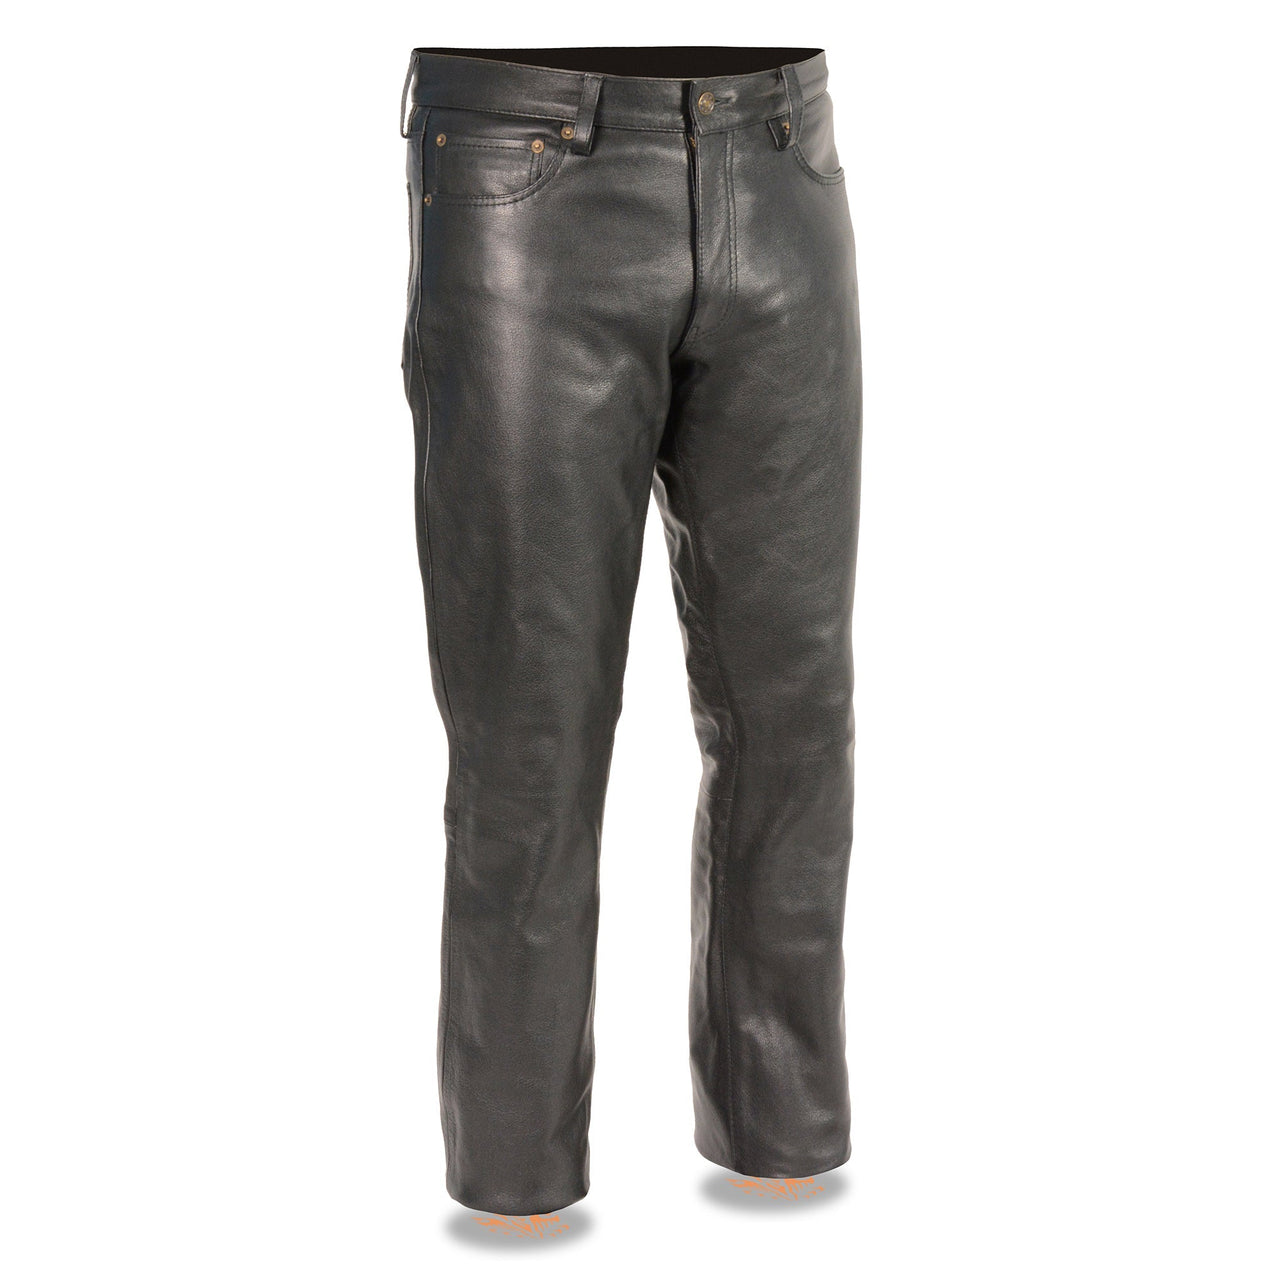 Men's Classic 5 Pocket Leather Pants - HighwayLeather